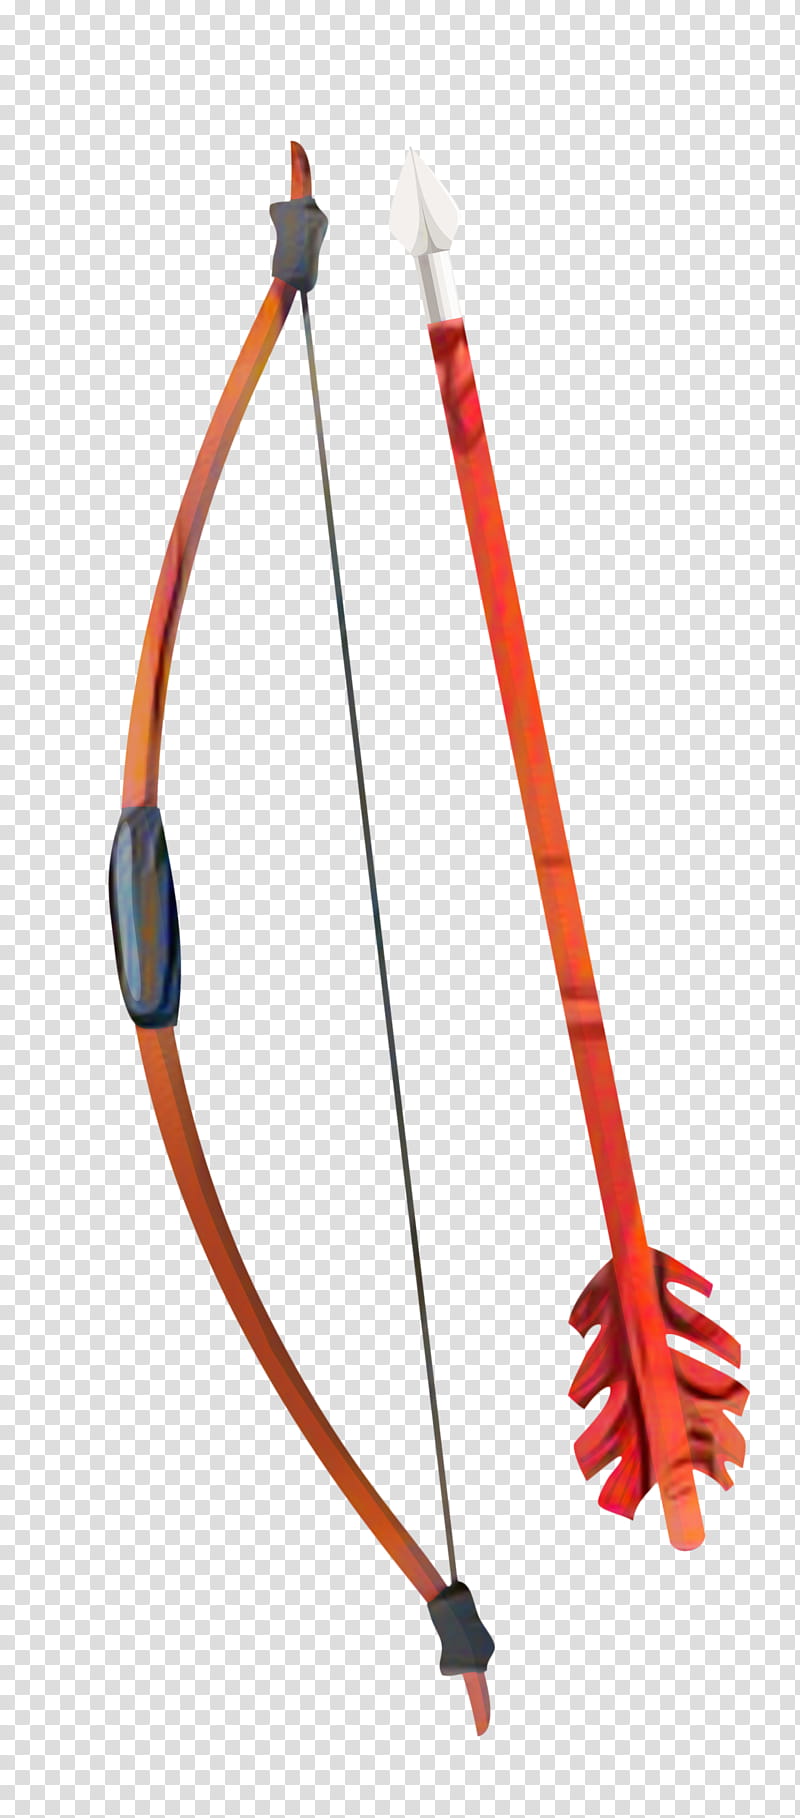 Bow And Arrow, Ranged Weapon, Ski Poles, Line, Skiing transparent background PNG clipart